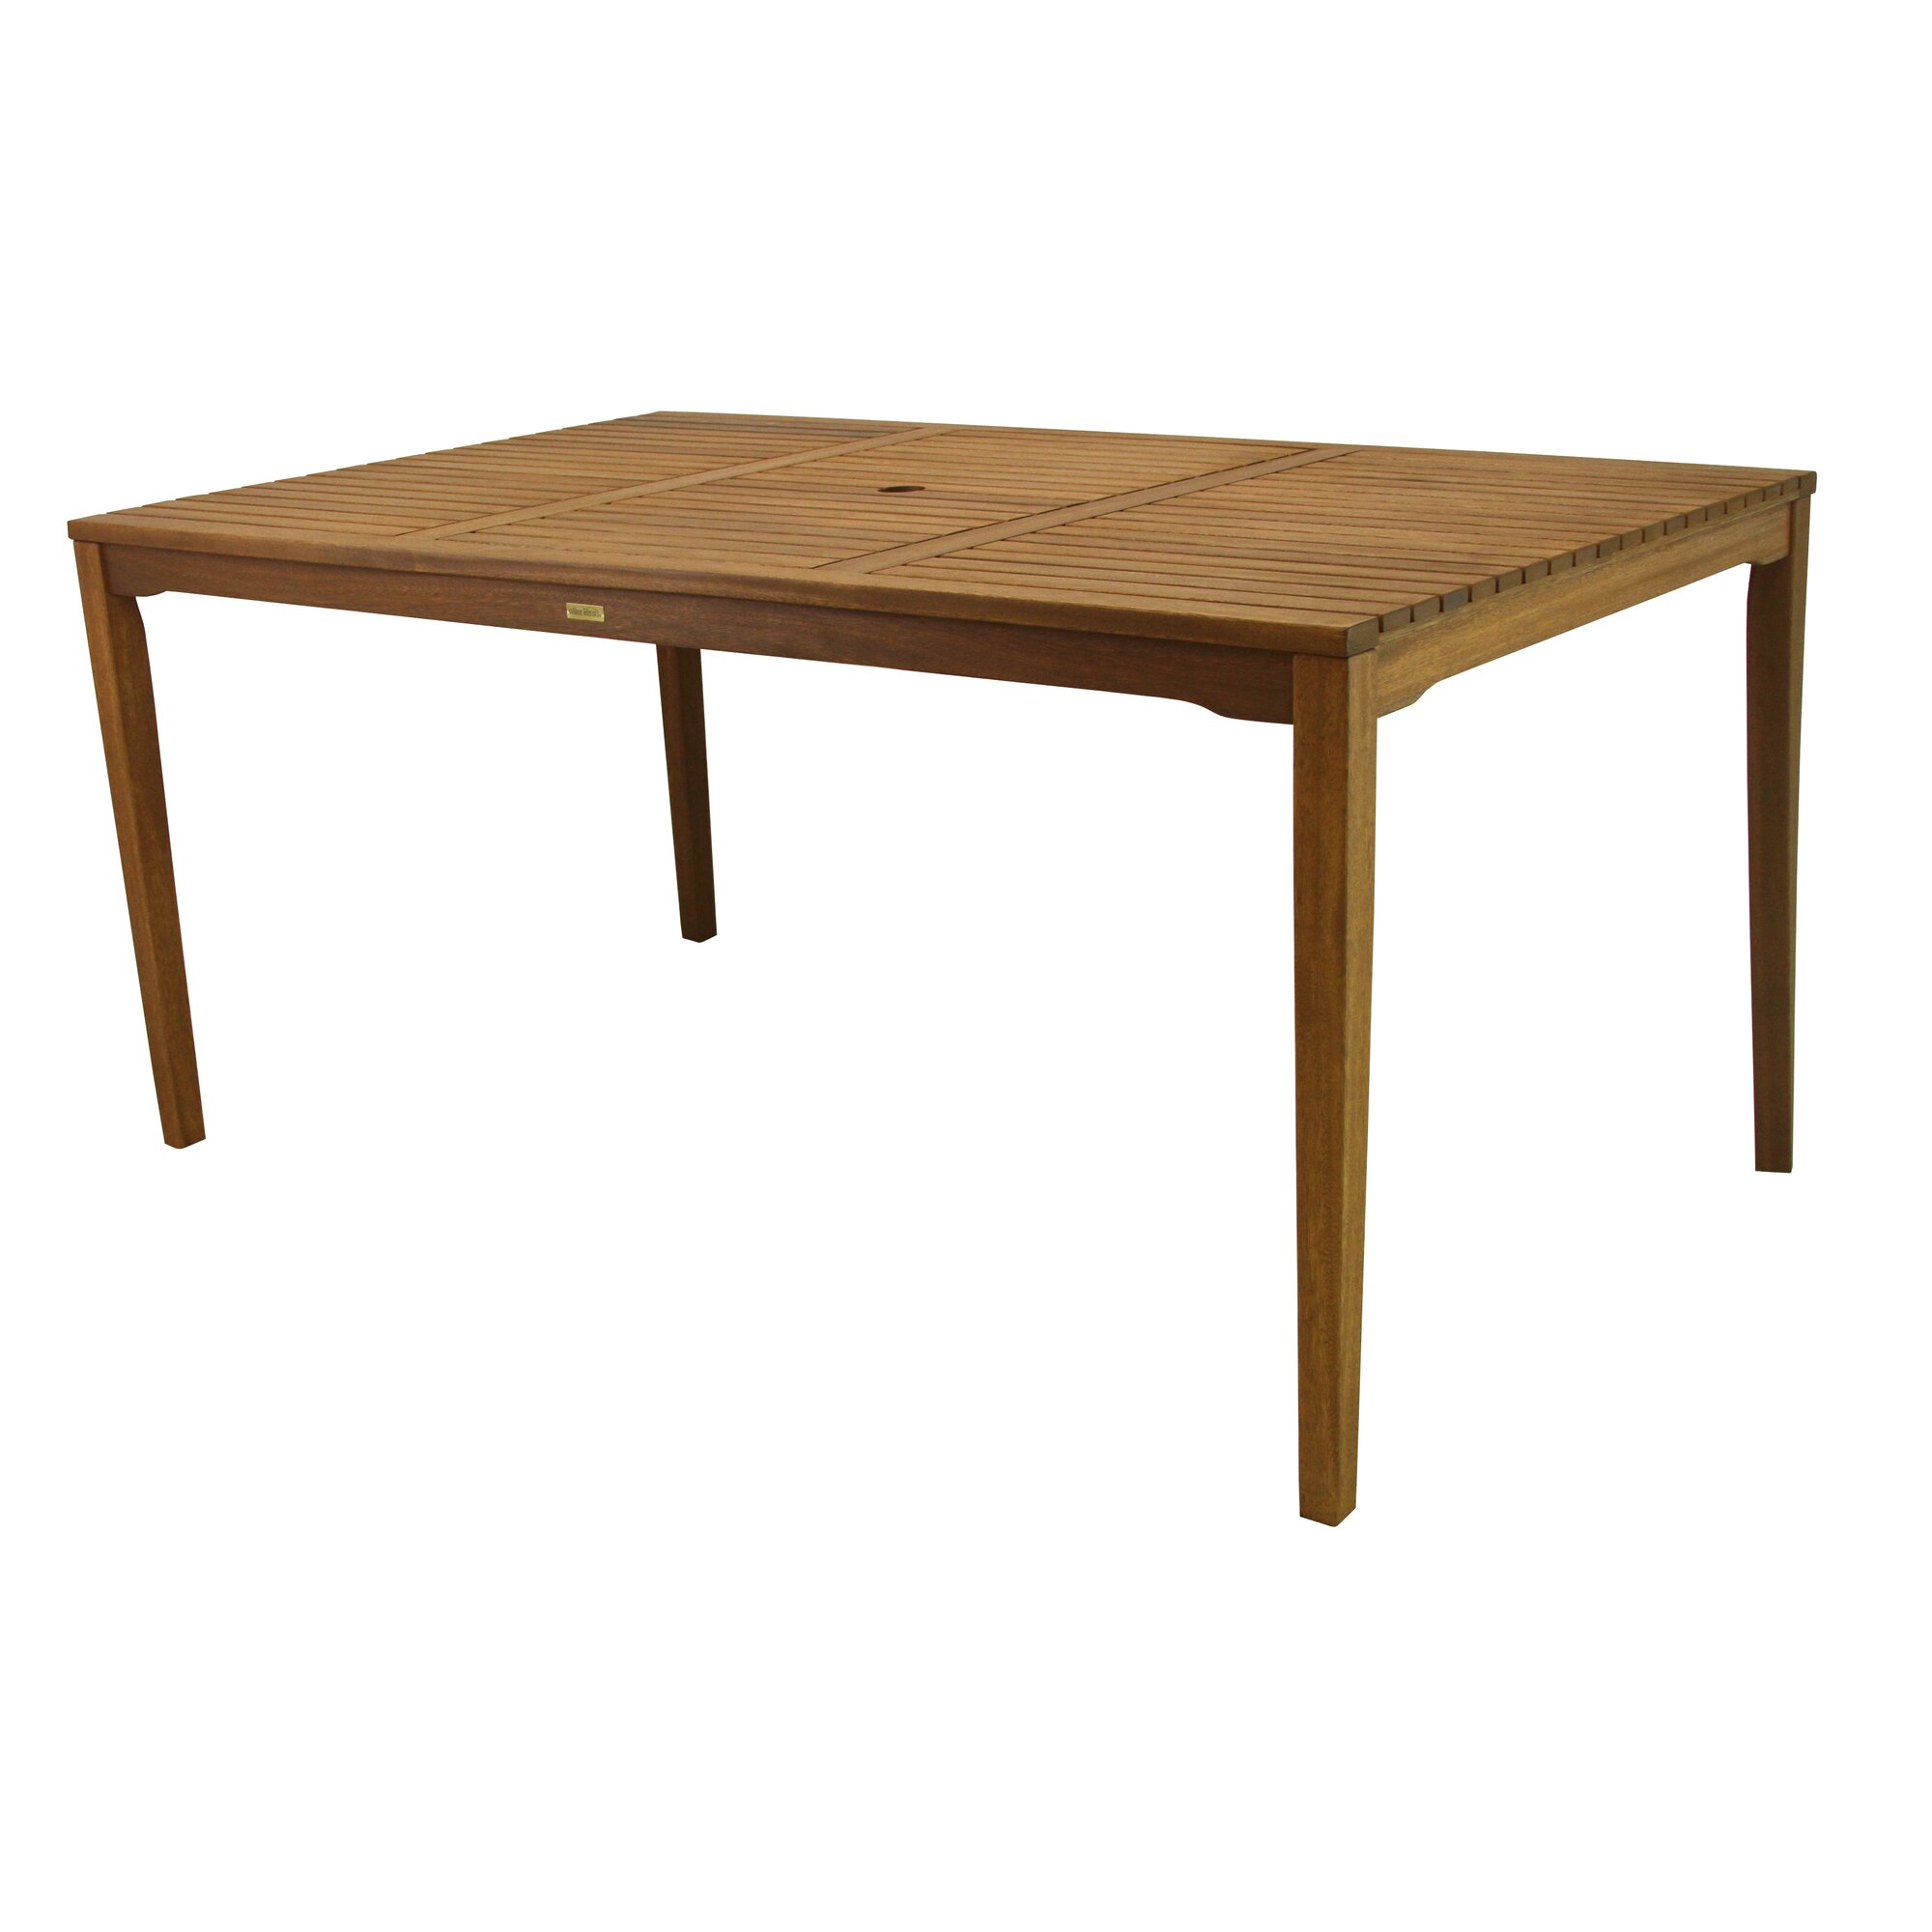 Hudgins Wooden Dining Table